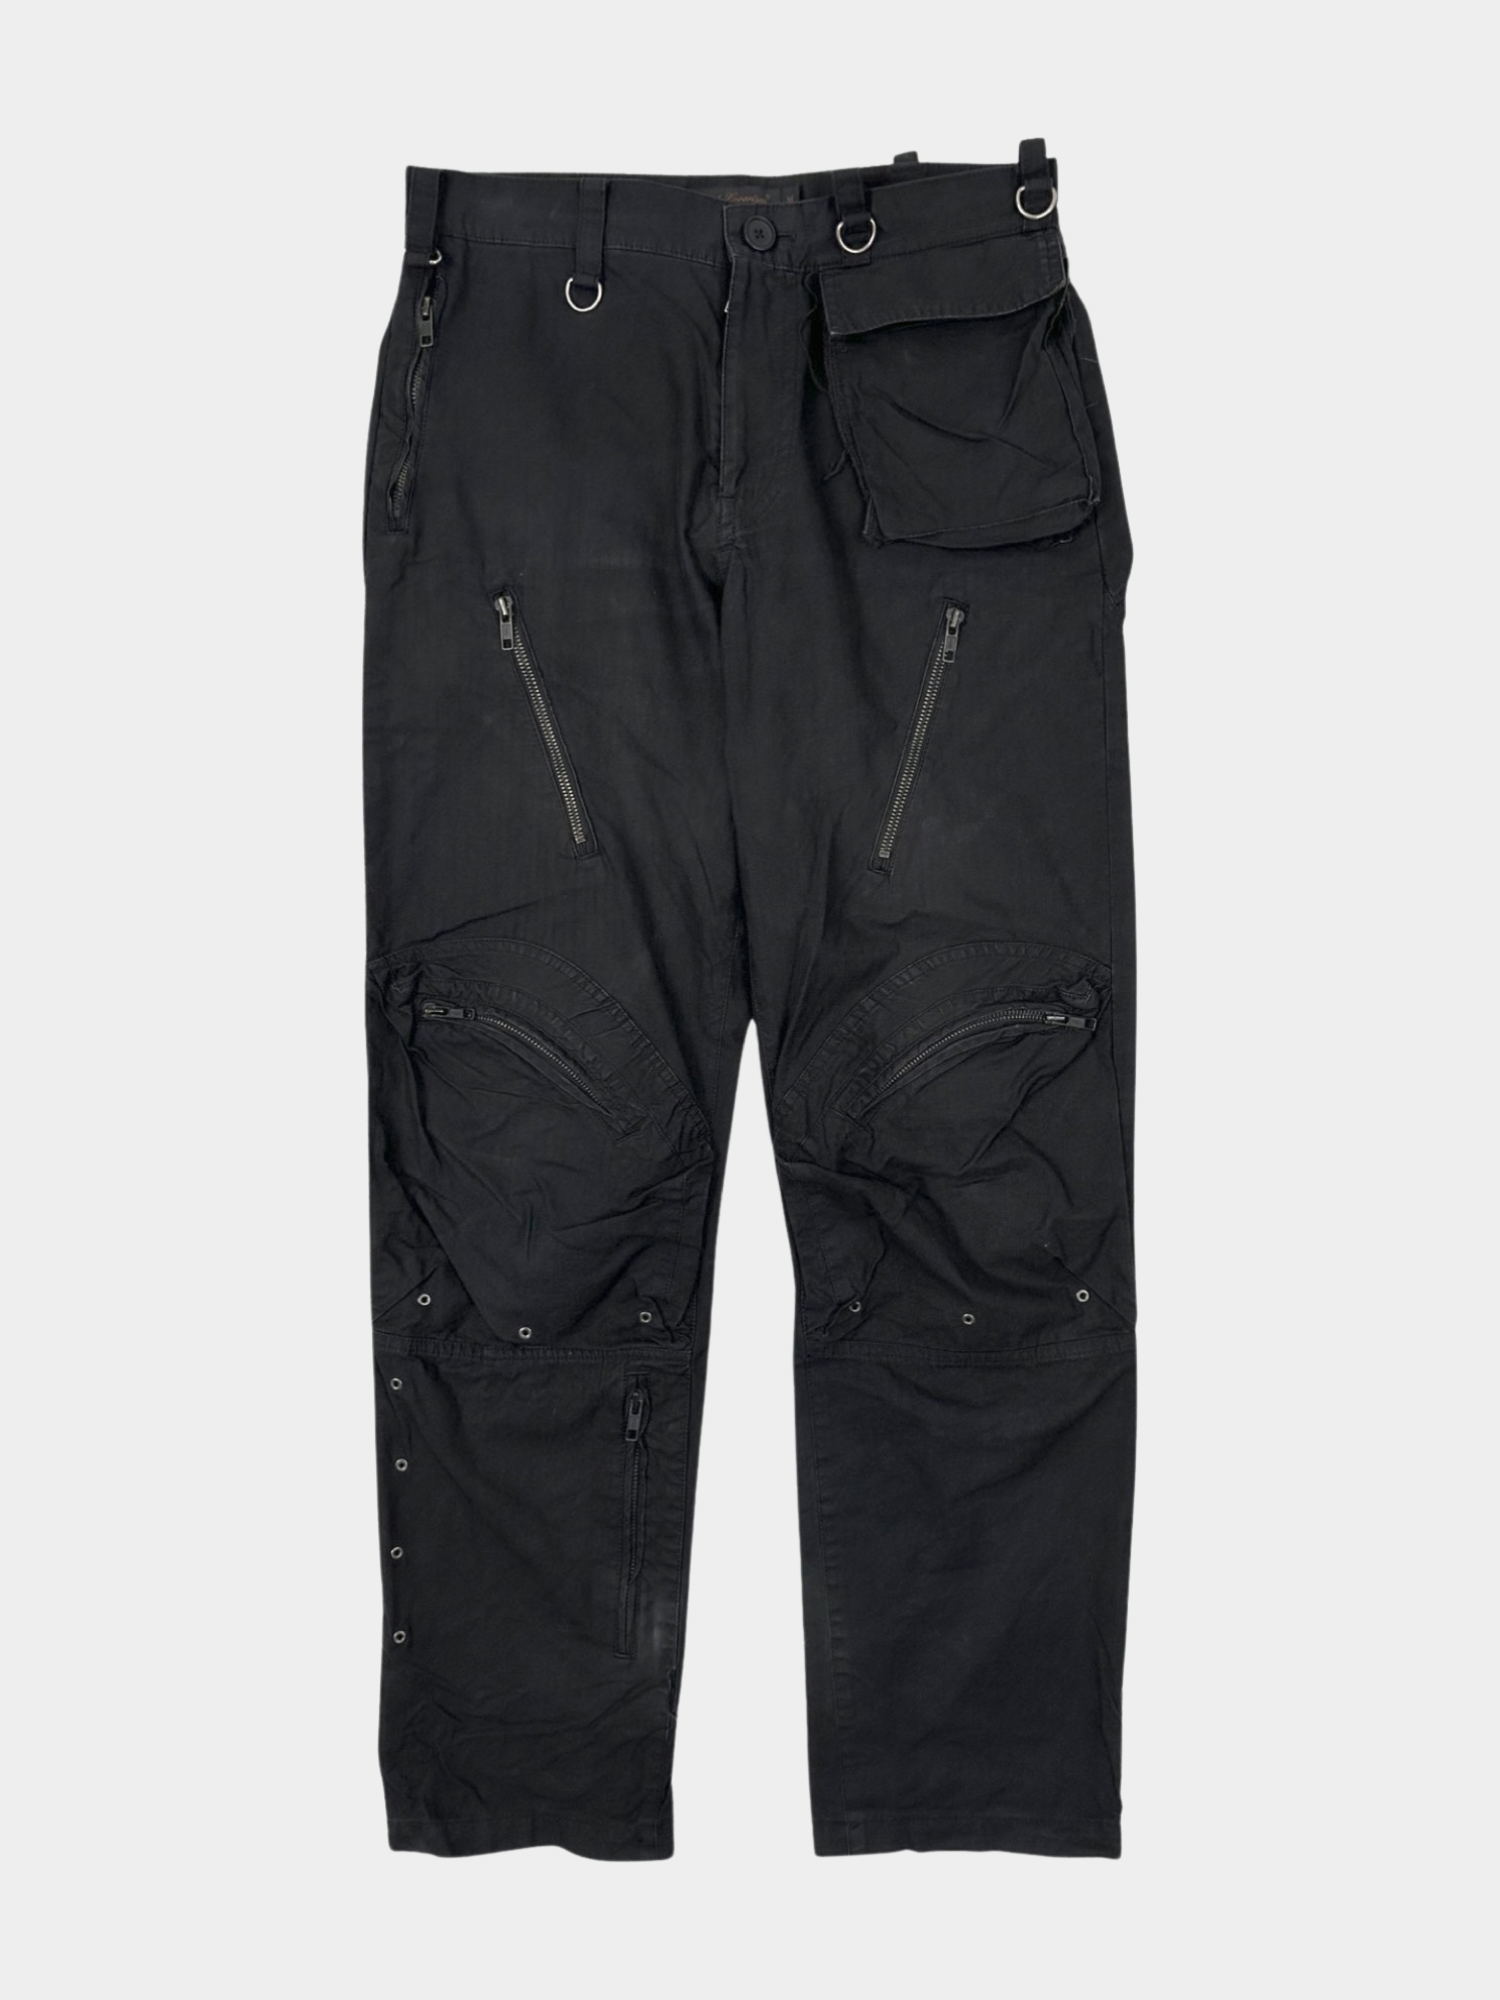 UNDERCOVER Ripstop Cotton Cargo Pants AW2003 